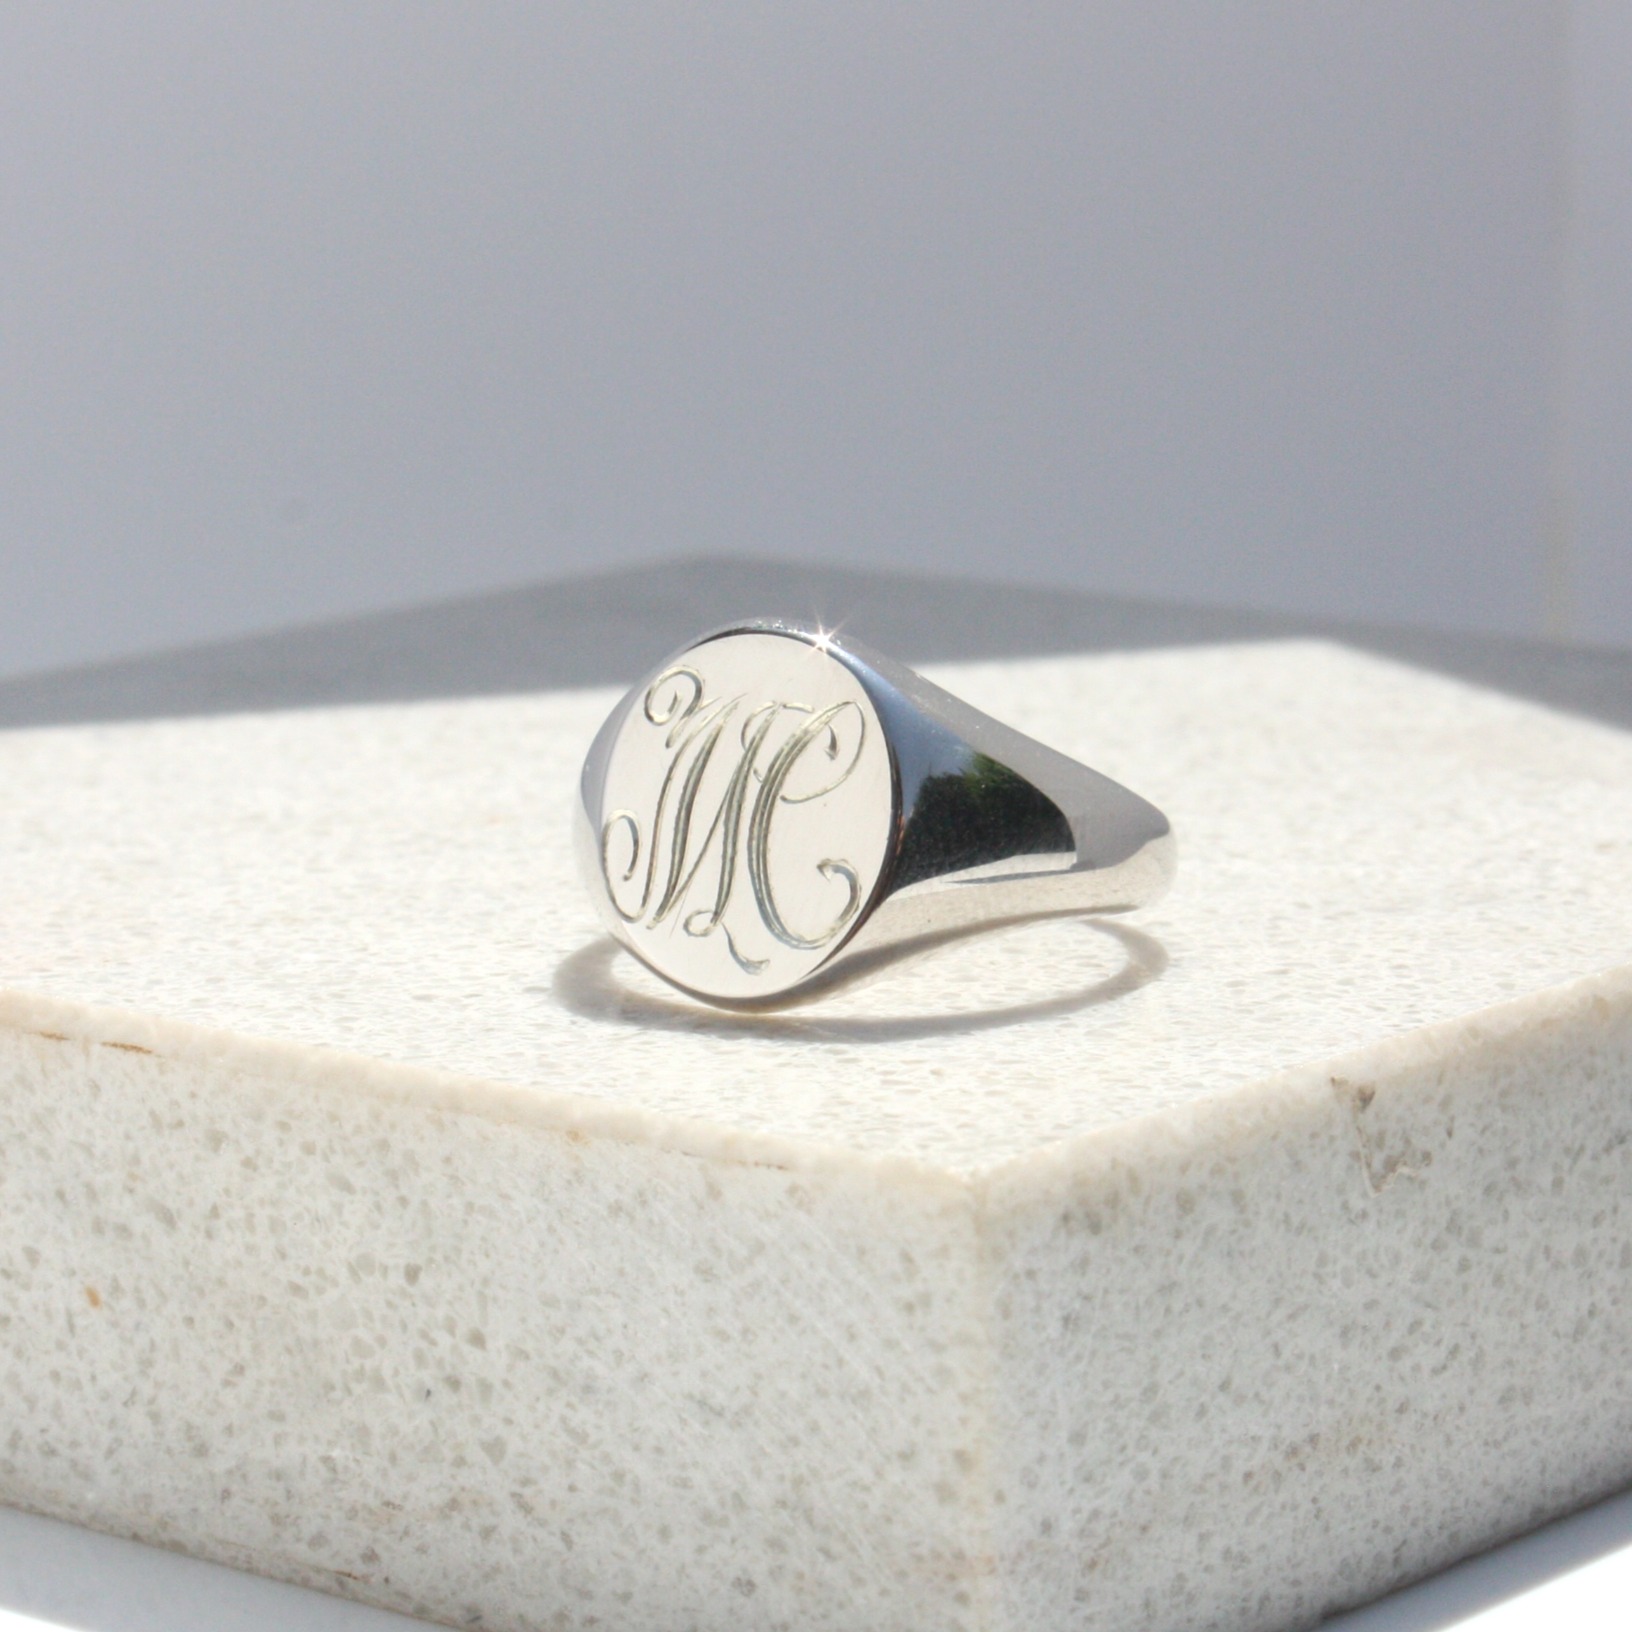 Oval Engraved Initial Signet Ring, men's ring, men's jewellery, signet ring, silver ring, initial ring, engraved signet ring, Danielle Camera Jewellery